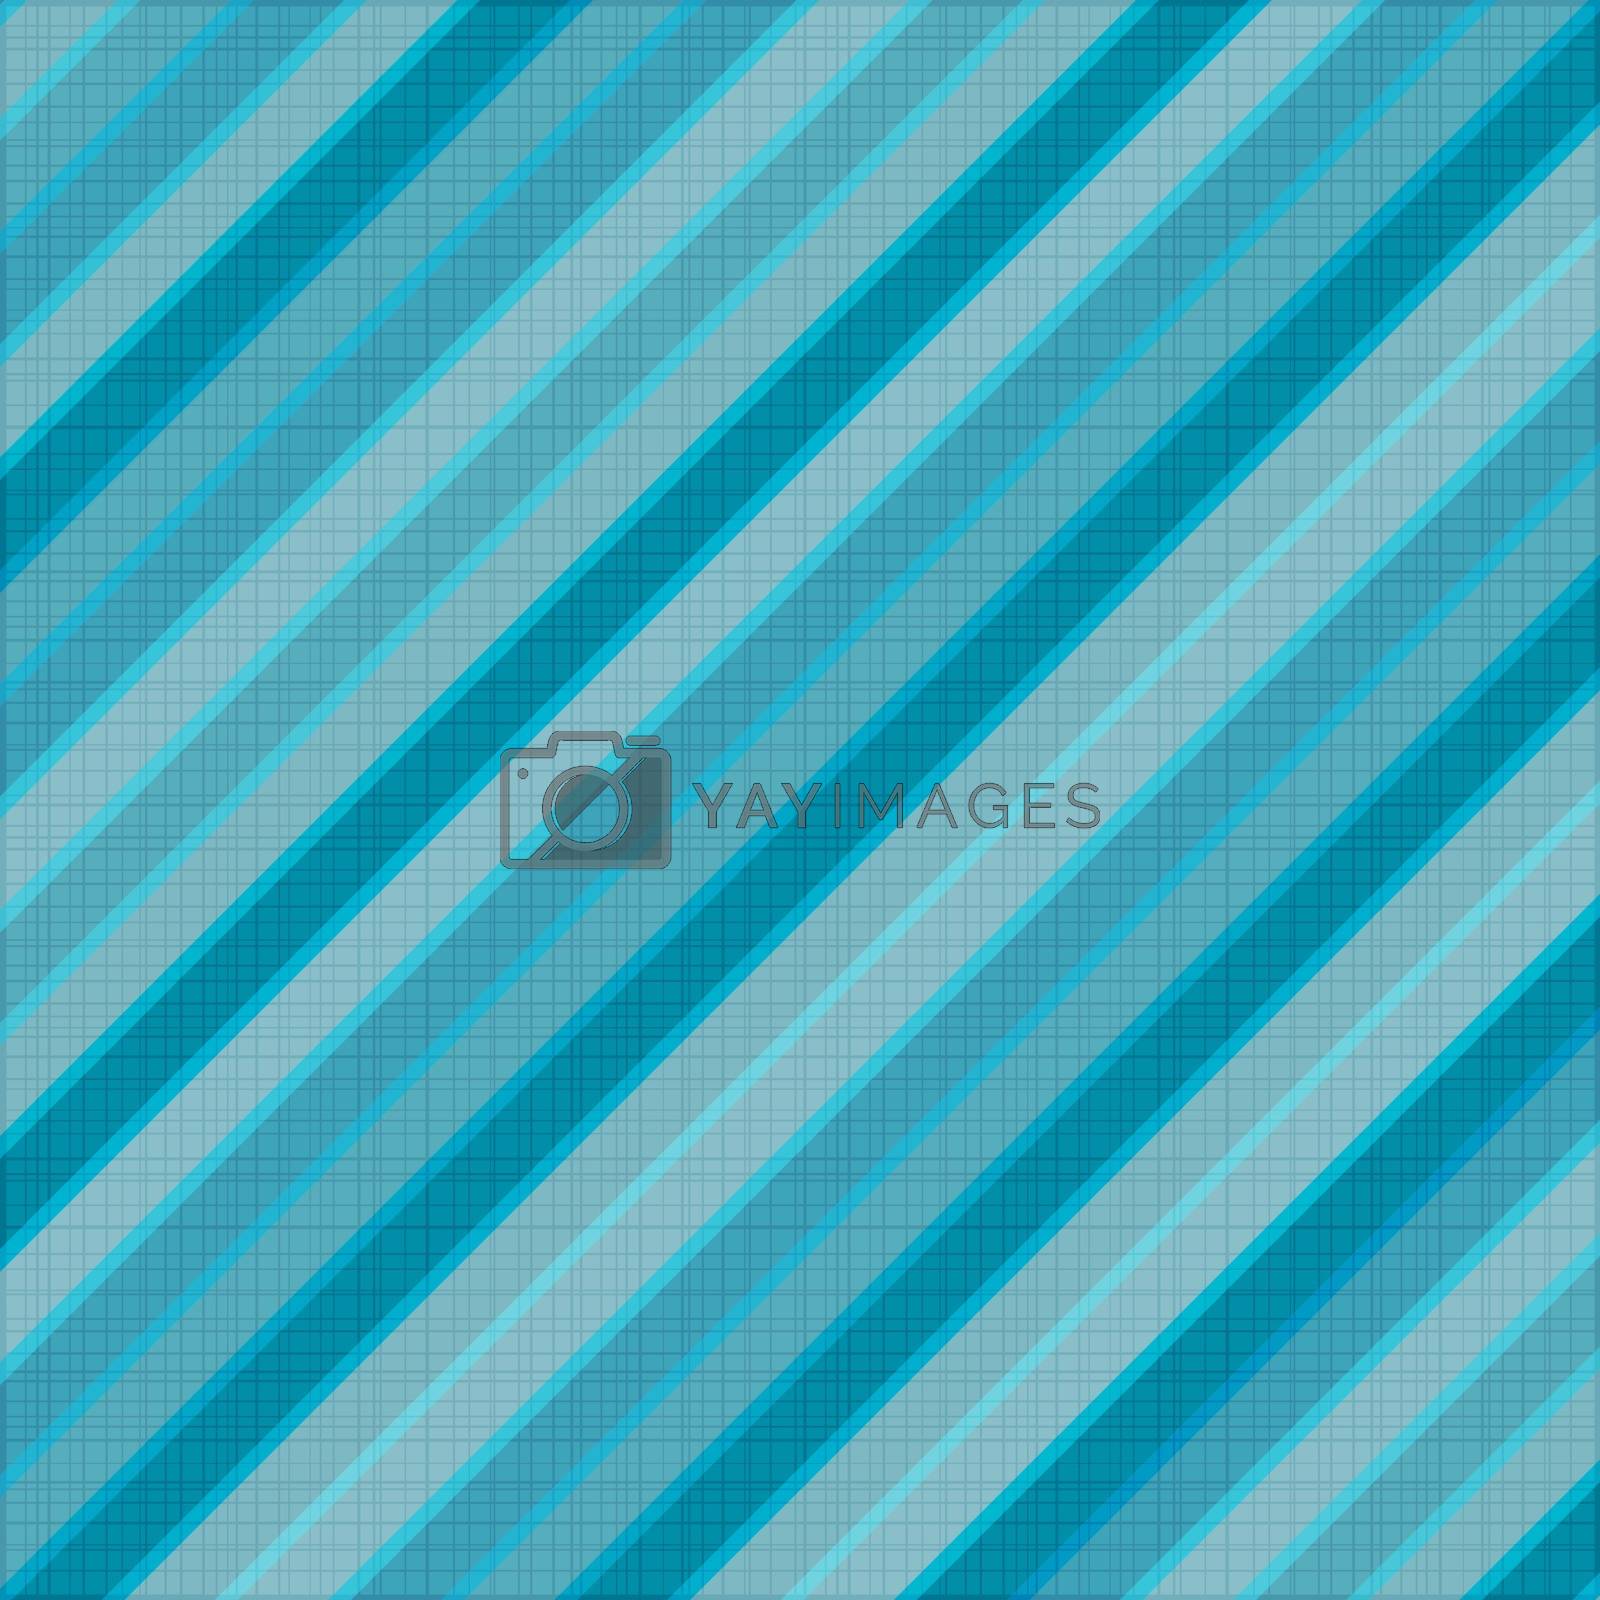 Royalty free image of Vector diagonal pattern by ggebl